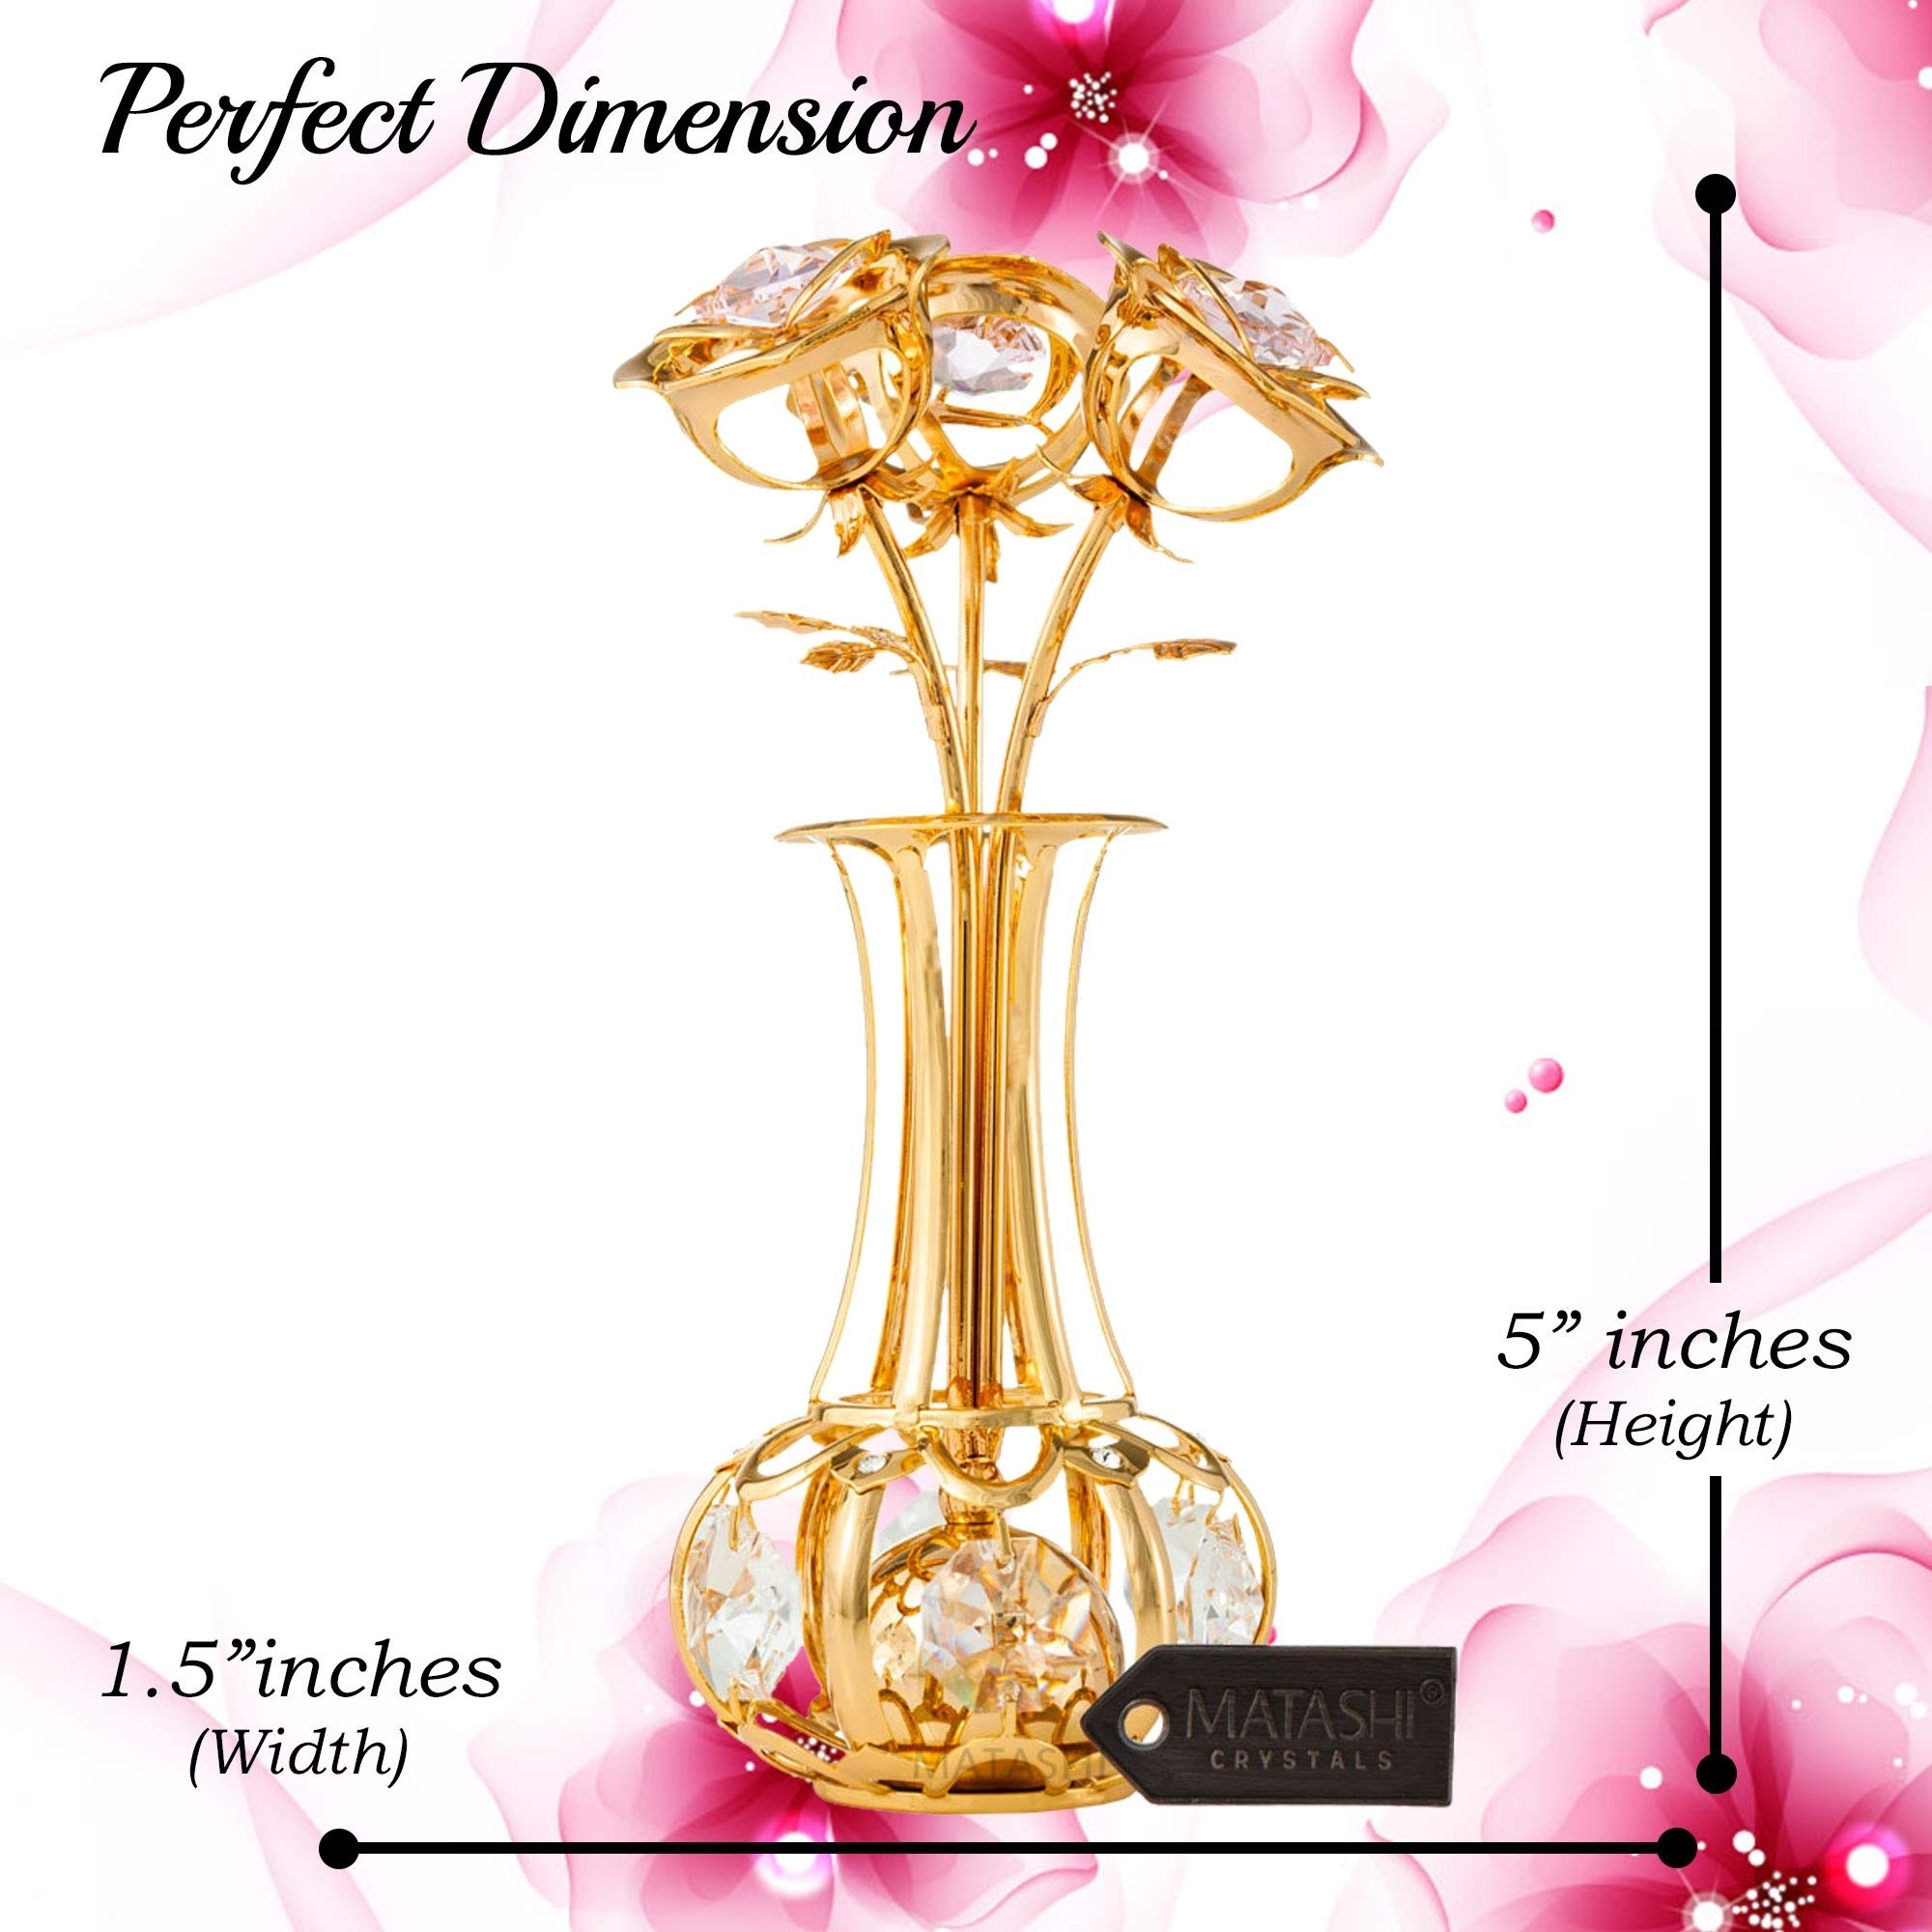 Best Mother's Day Gift Matashi 24k Gold Plated Flowers Bouquet-Vase W/ Pink & Clear Crystals, Table-Top #1 Gift For Mom From Daughter, Son